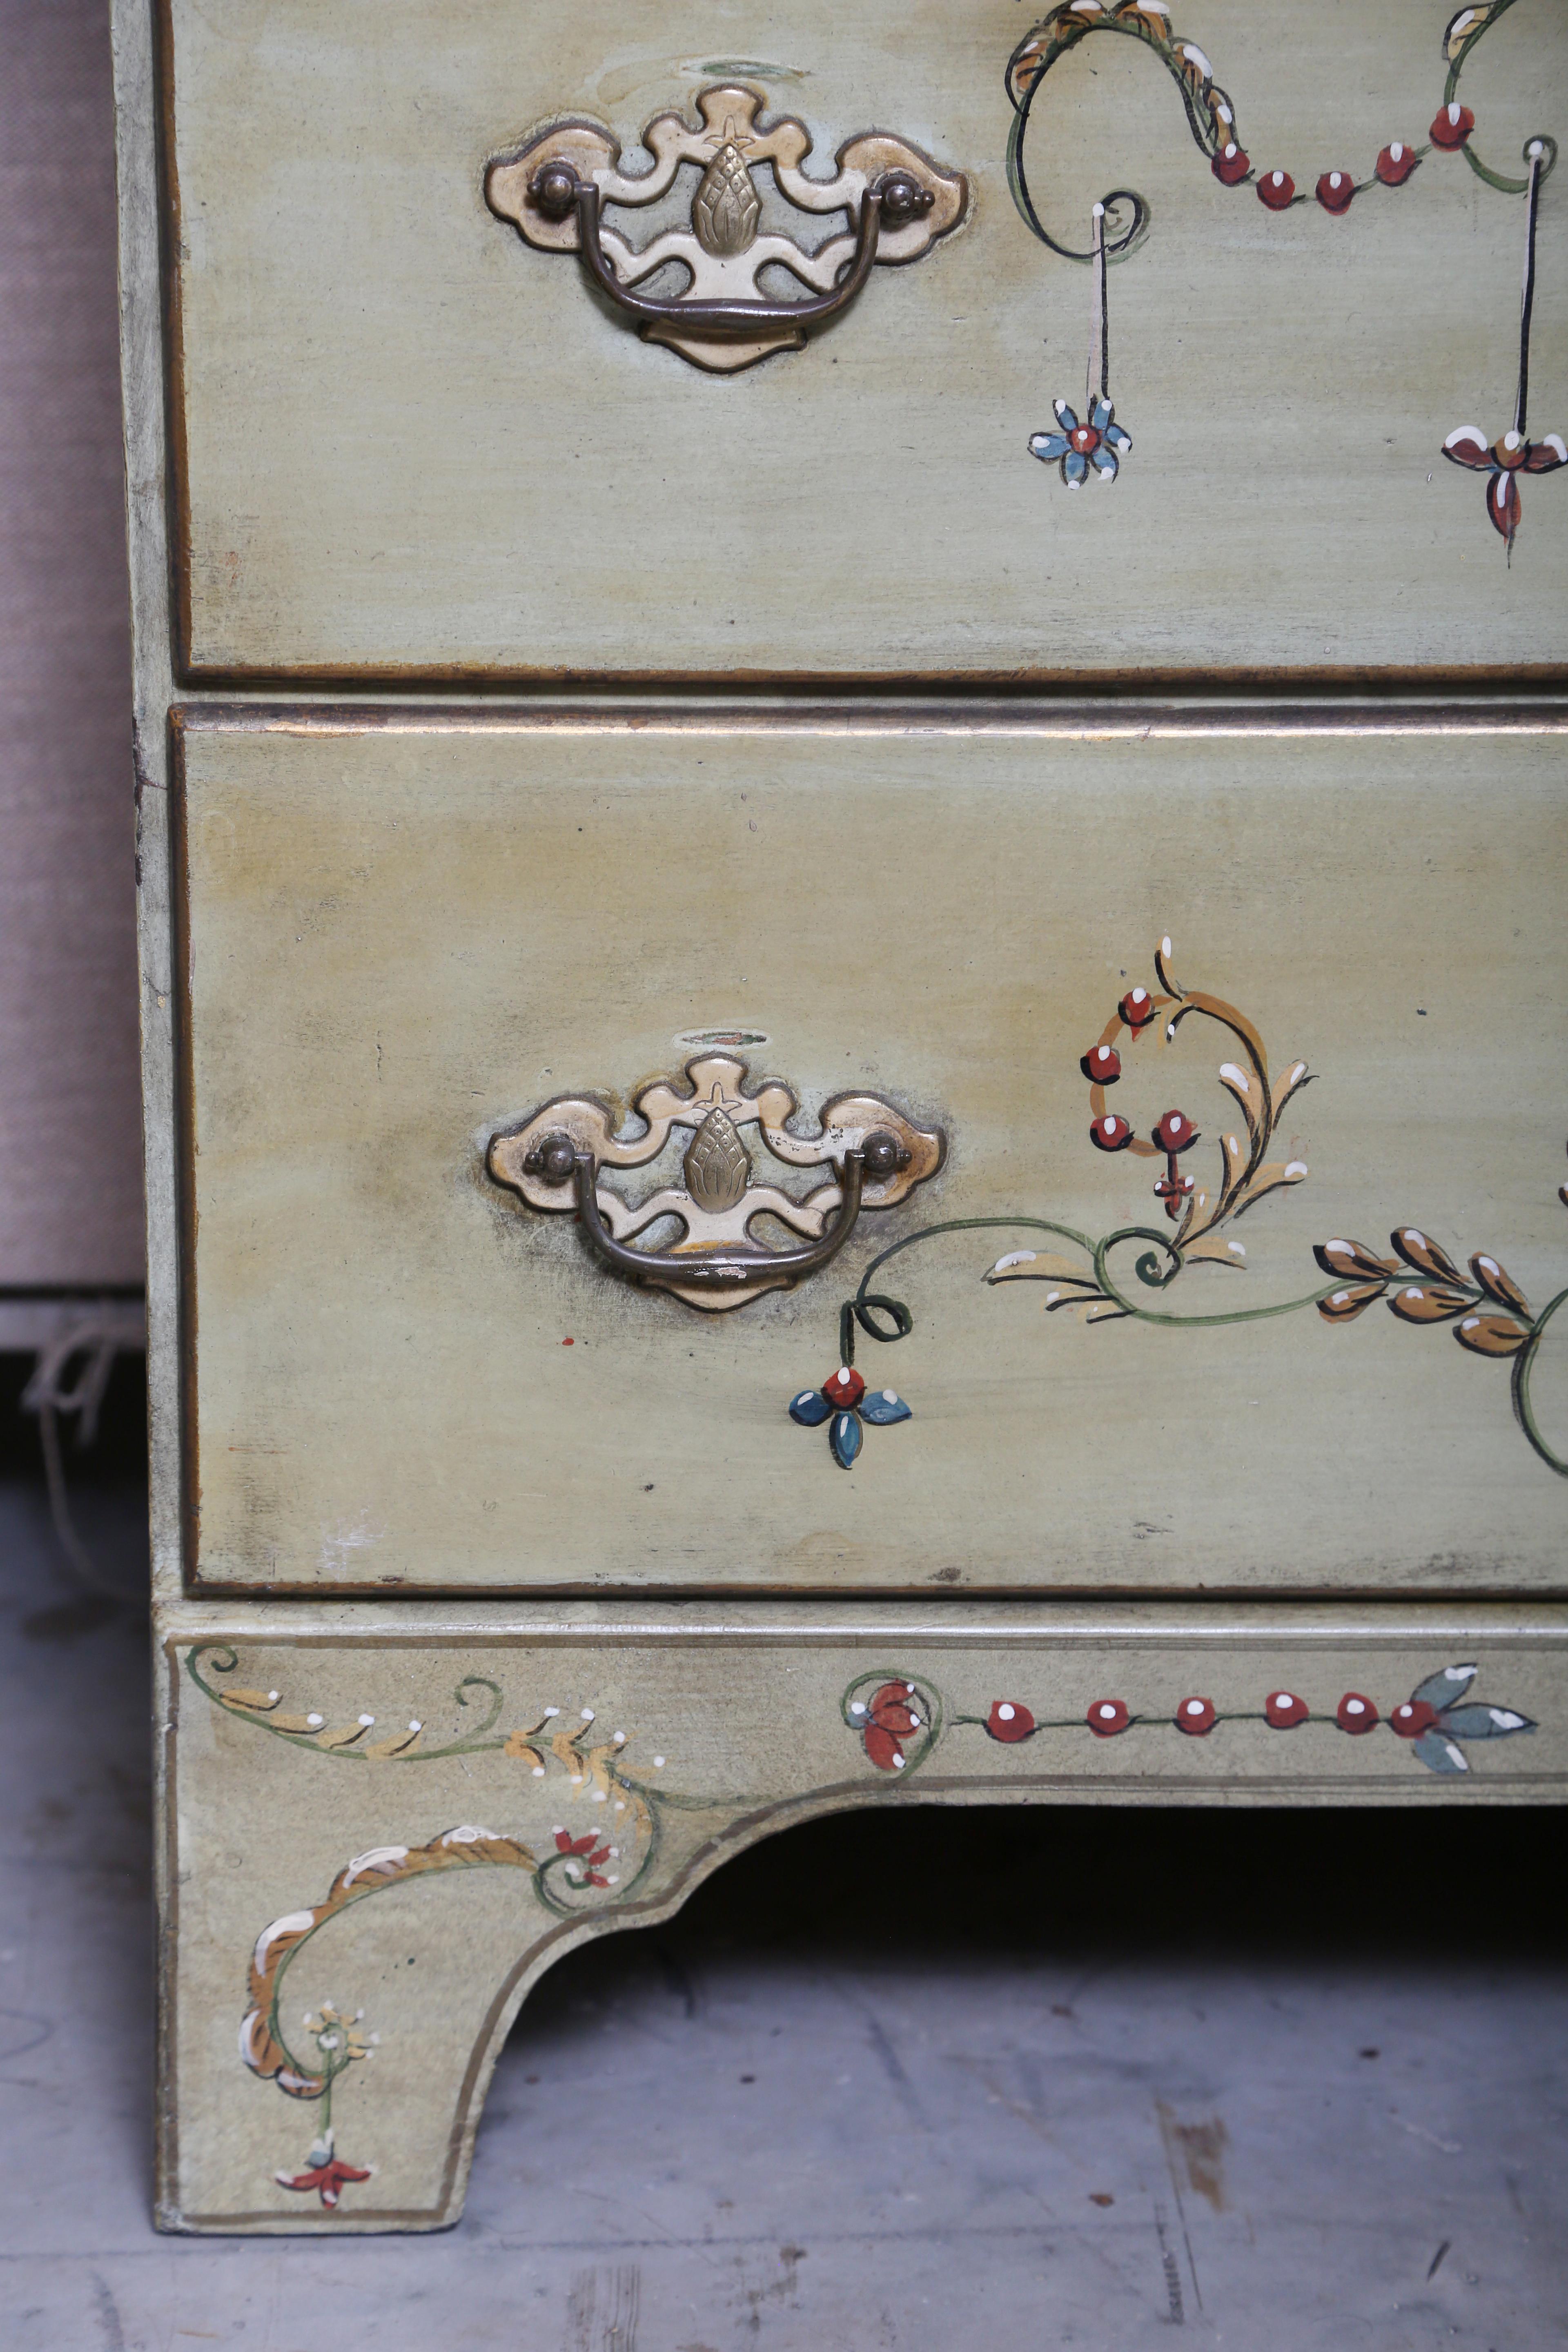 Early 20th Century Two Part Bureau Bookcase-Hand Painted in a Classical Style